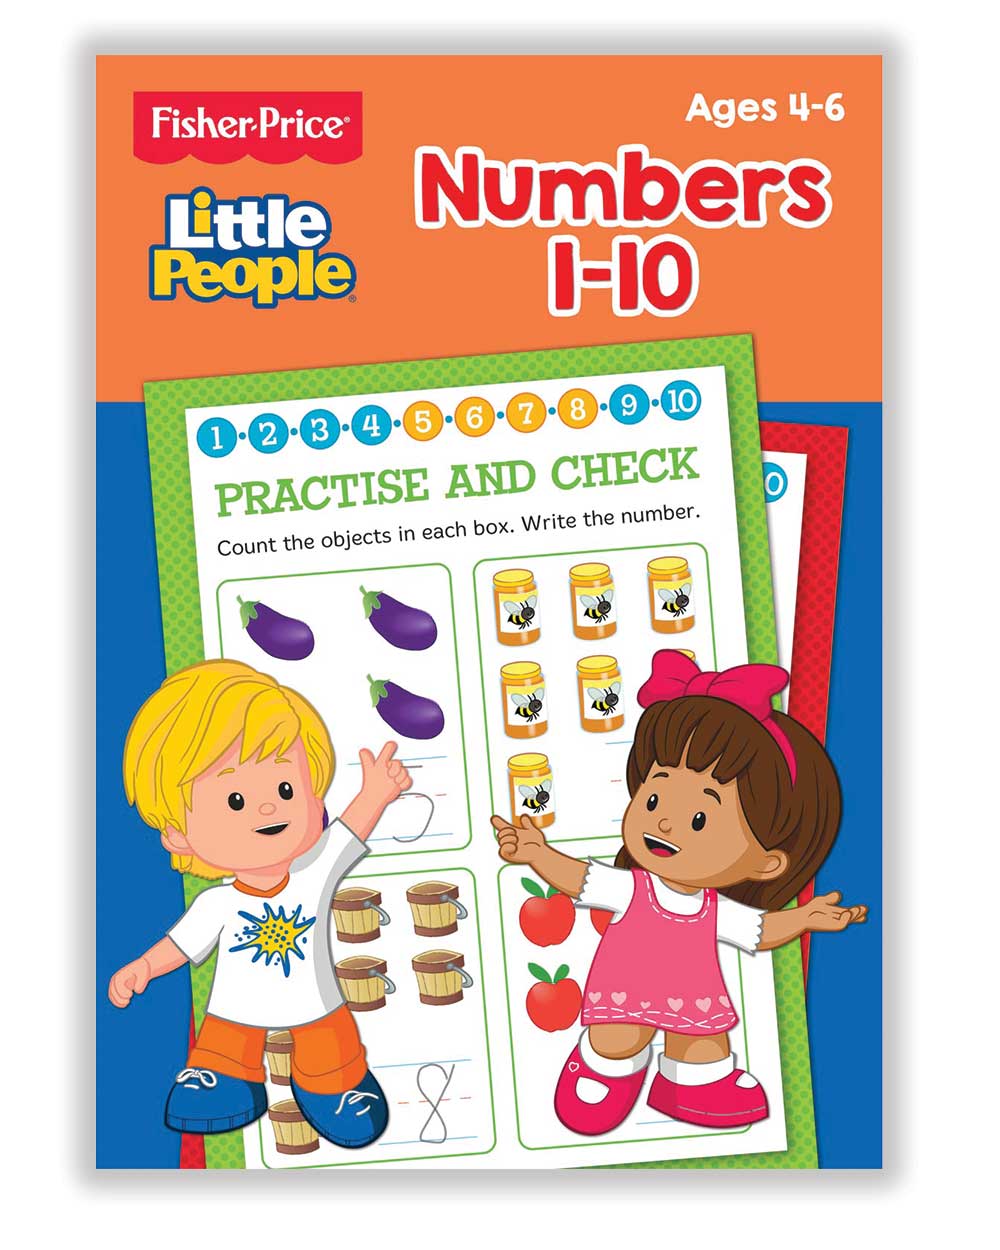 Fisher Price Little People Numbers 1-10 ages 4-6. 